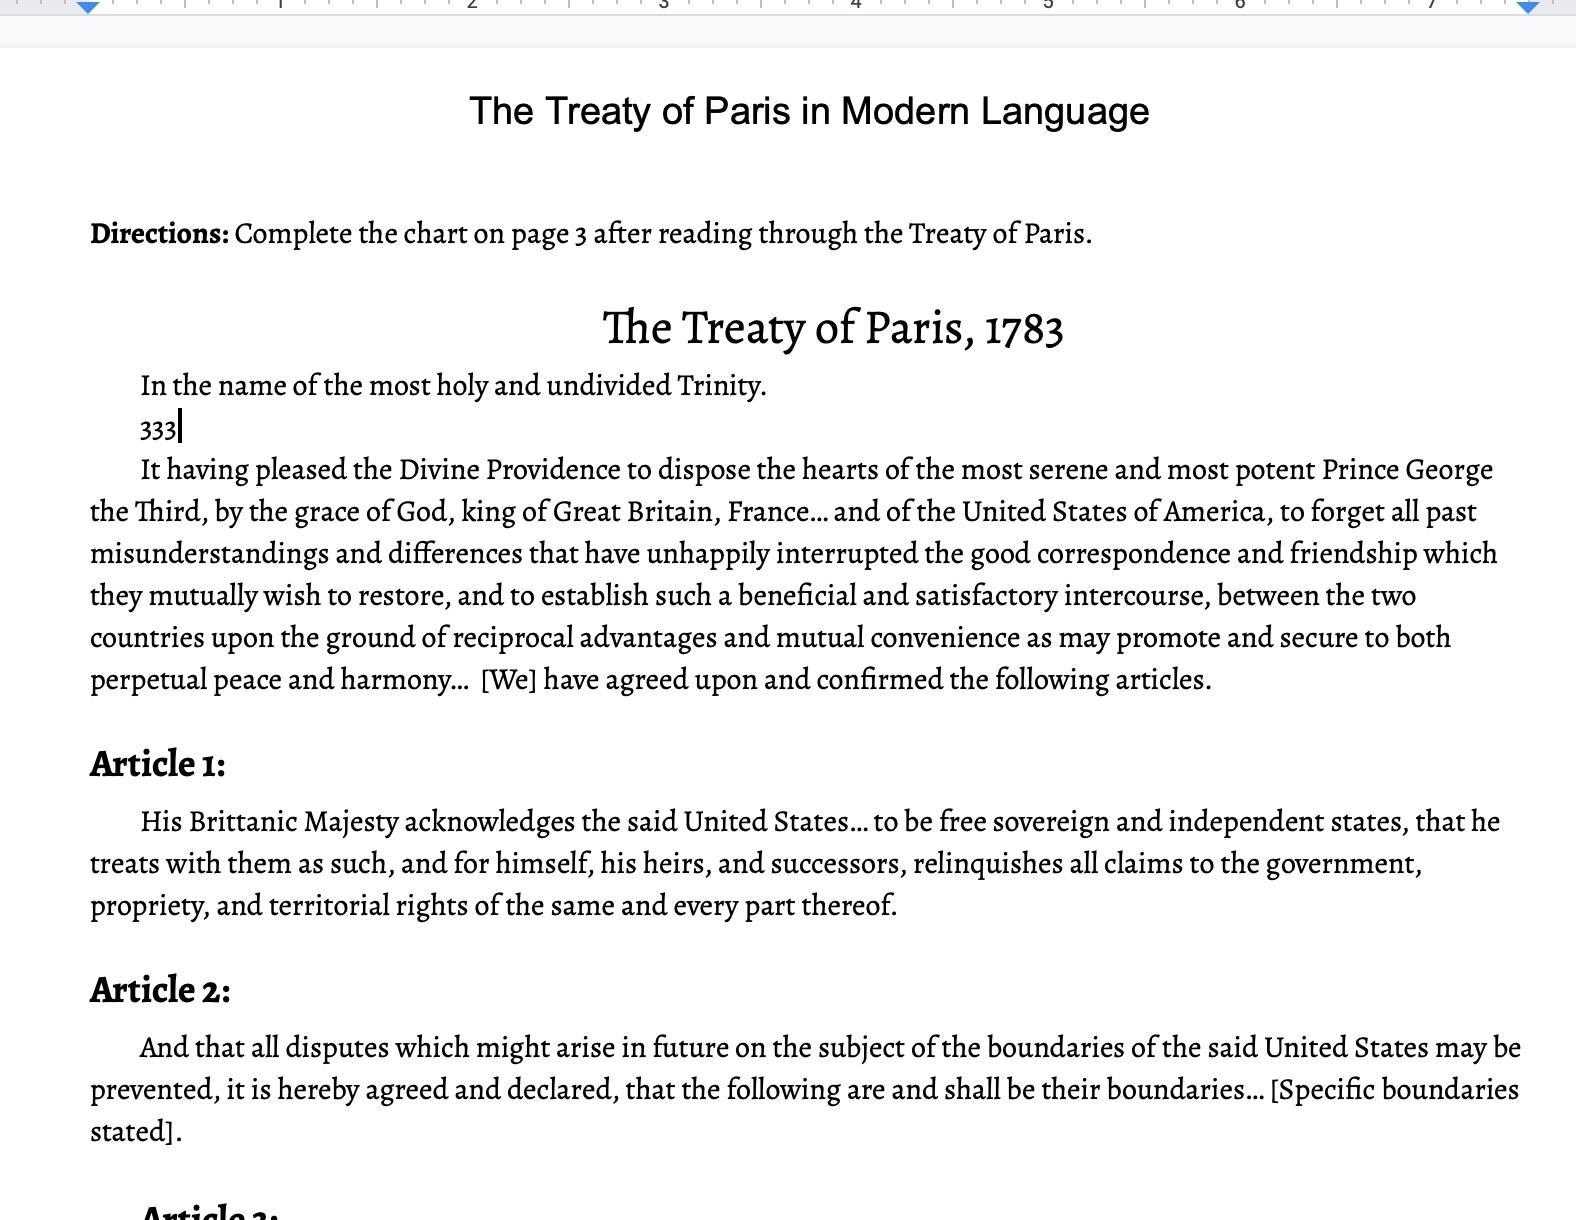 Read The The Treaty Of Paris In Modern Language Article To Answer The Questions!